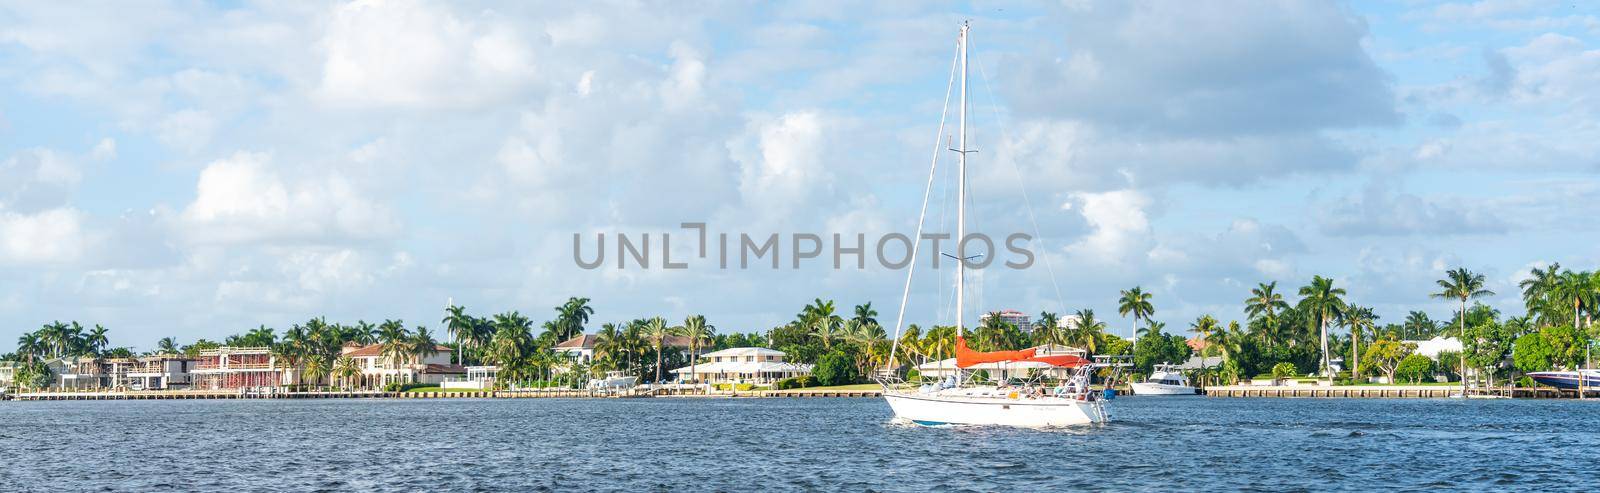 FORT LAUDERDALE, FLORIDA - September 20, 2019: Panorama of mansions in Fort Lauderdale from the canal by Mariakray